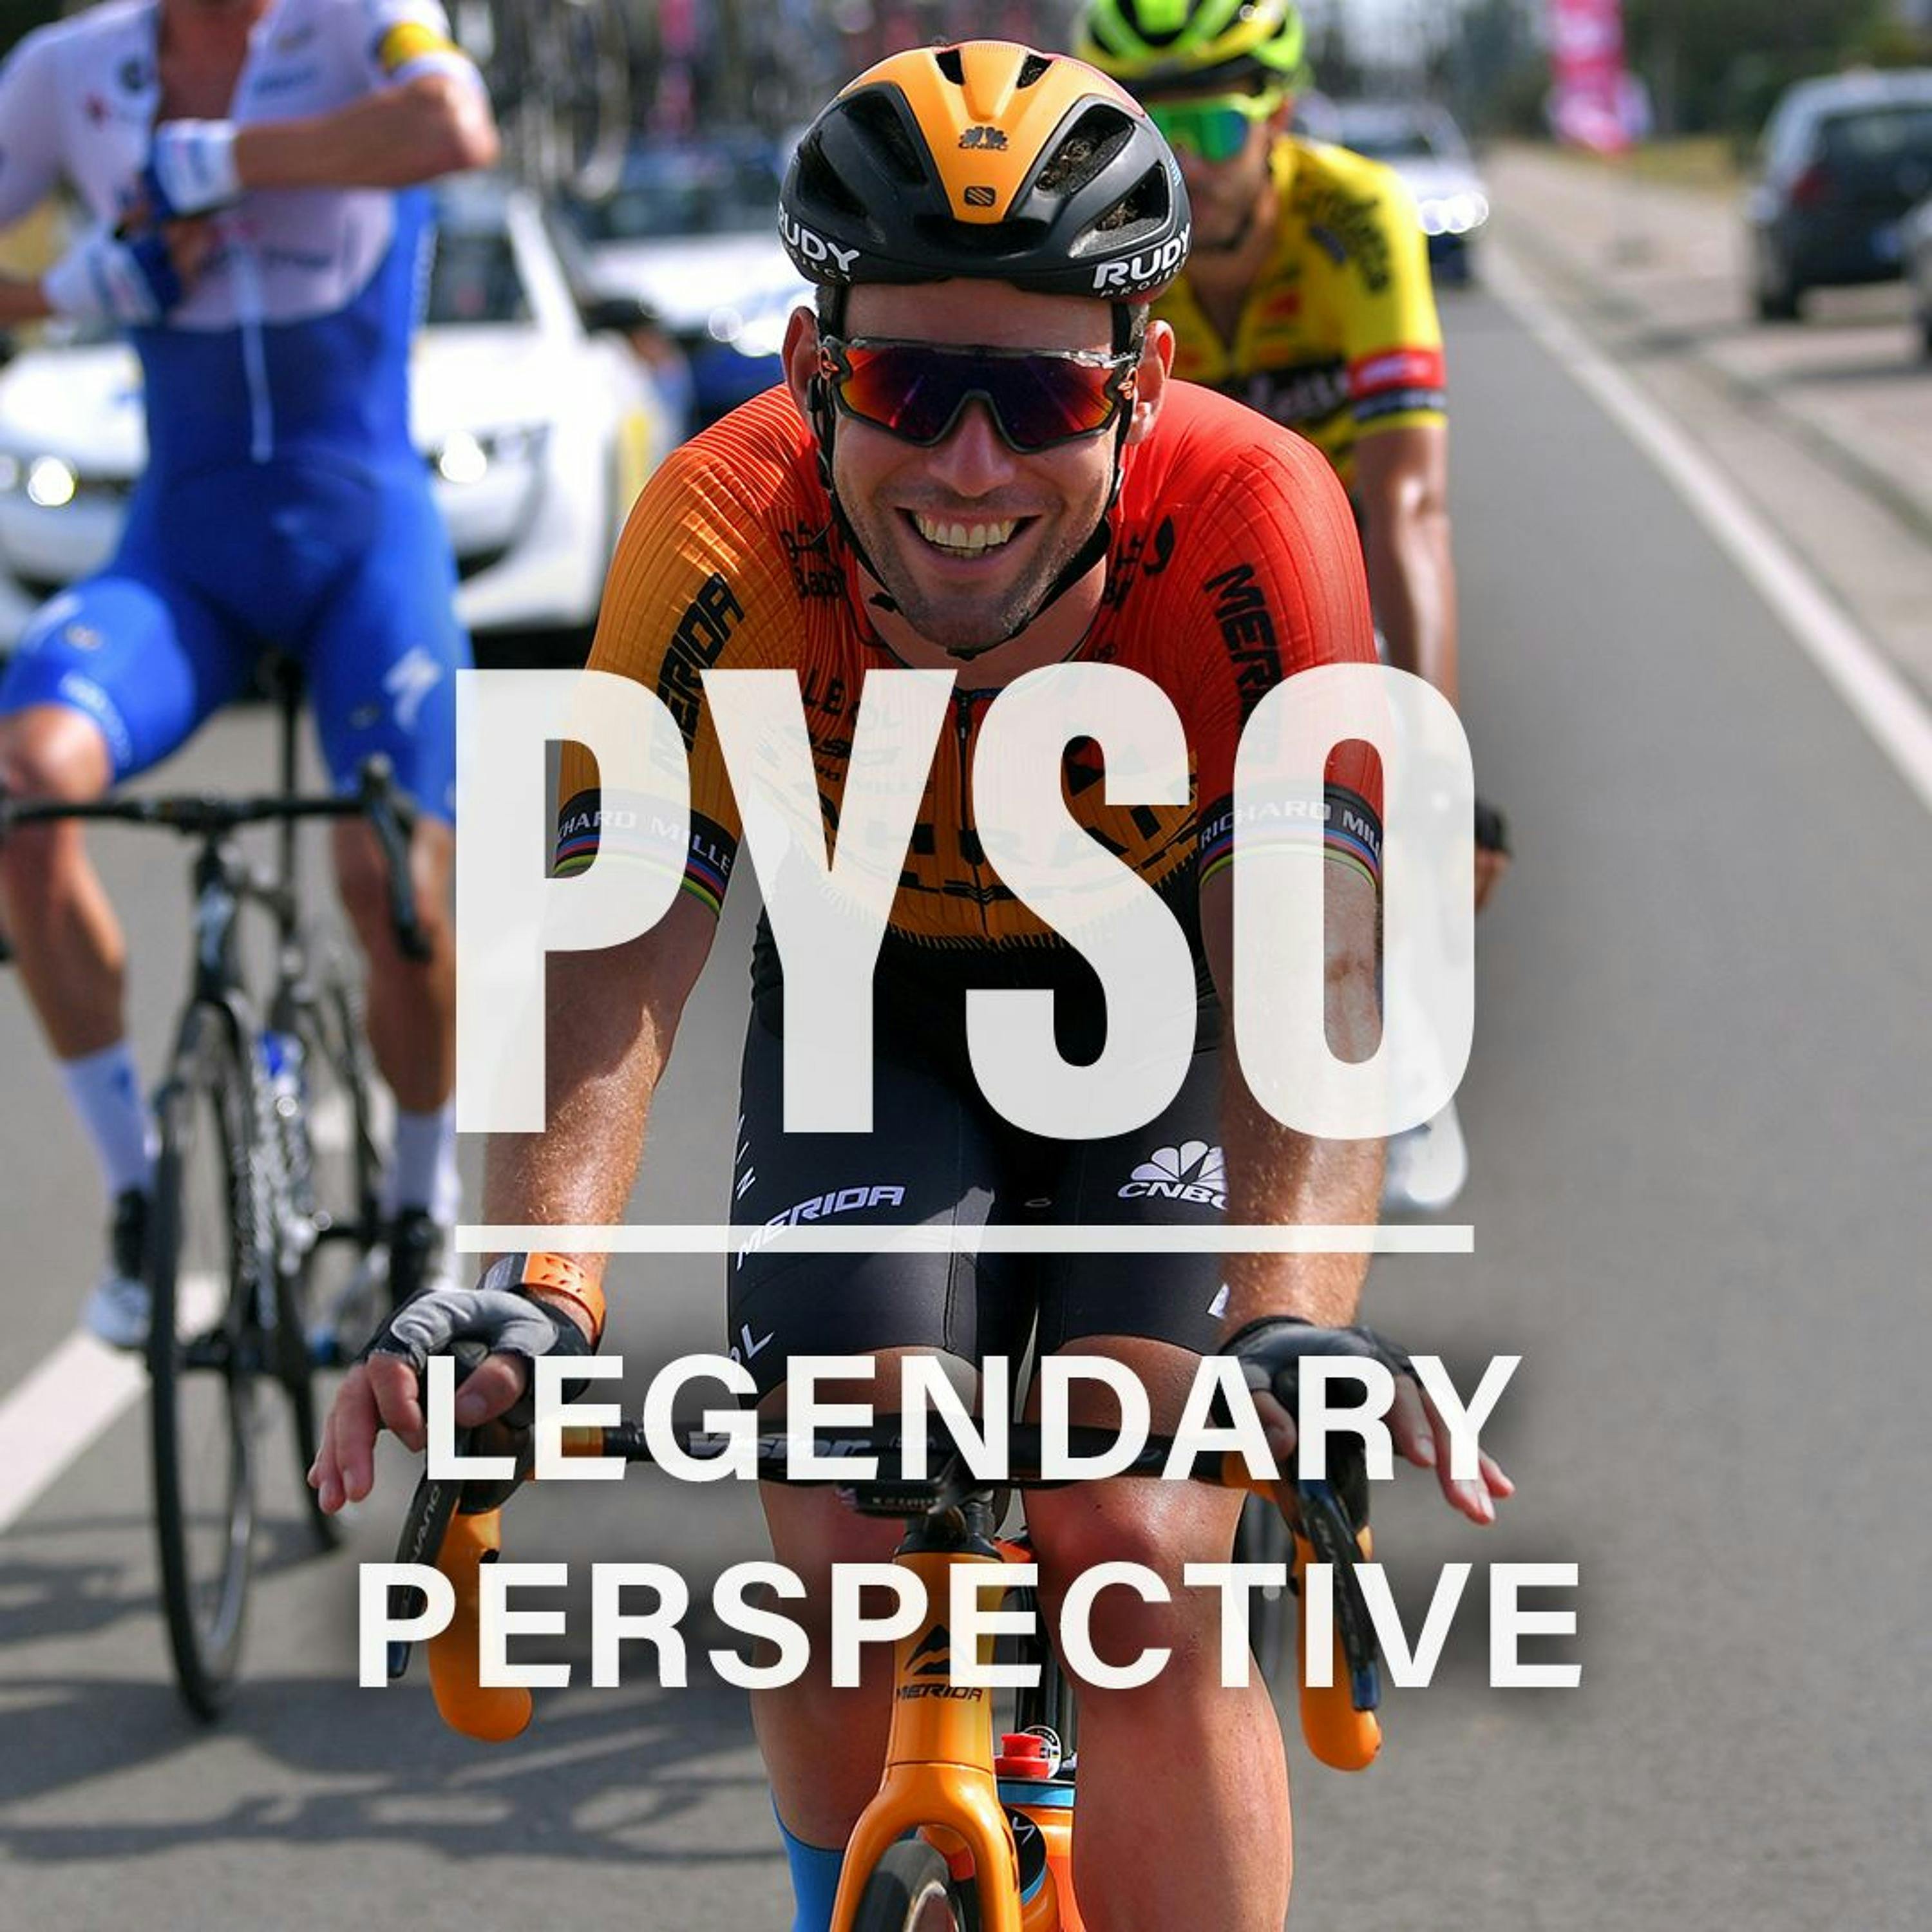 PYSO, ep. 68: 30-time stage winner Mark Cavendish reflects on the Tour de France